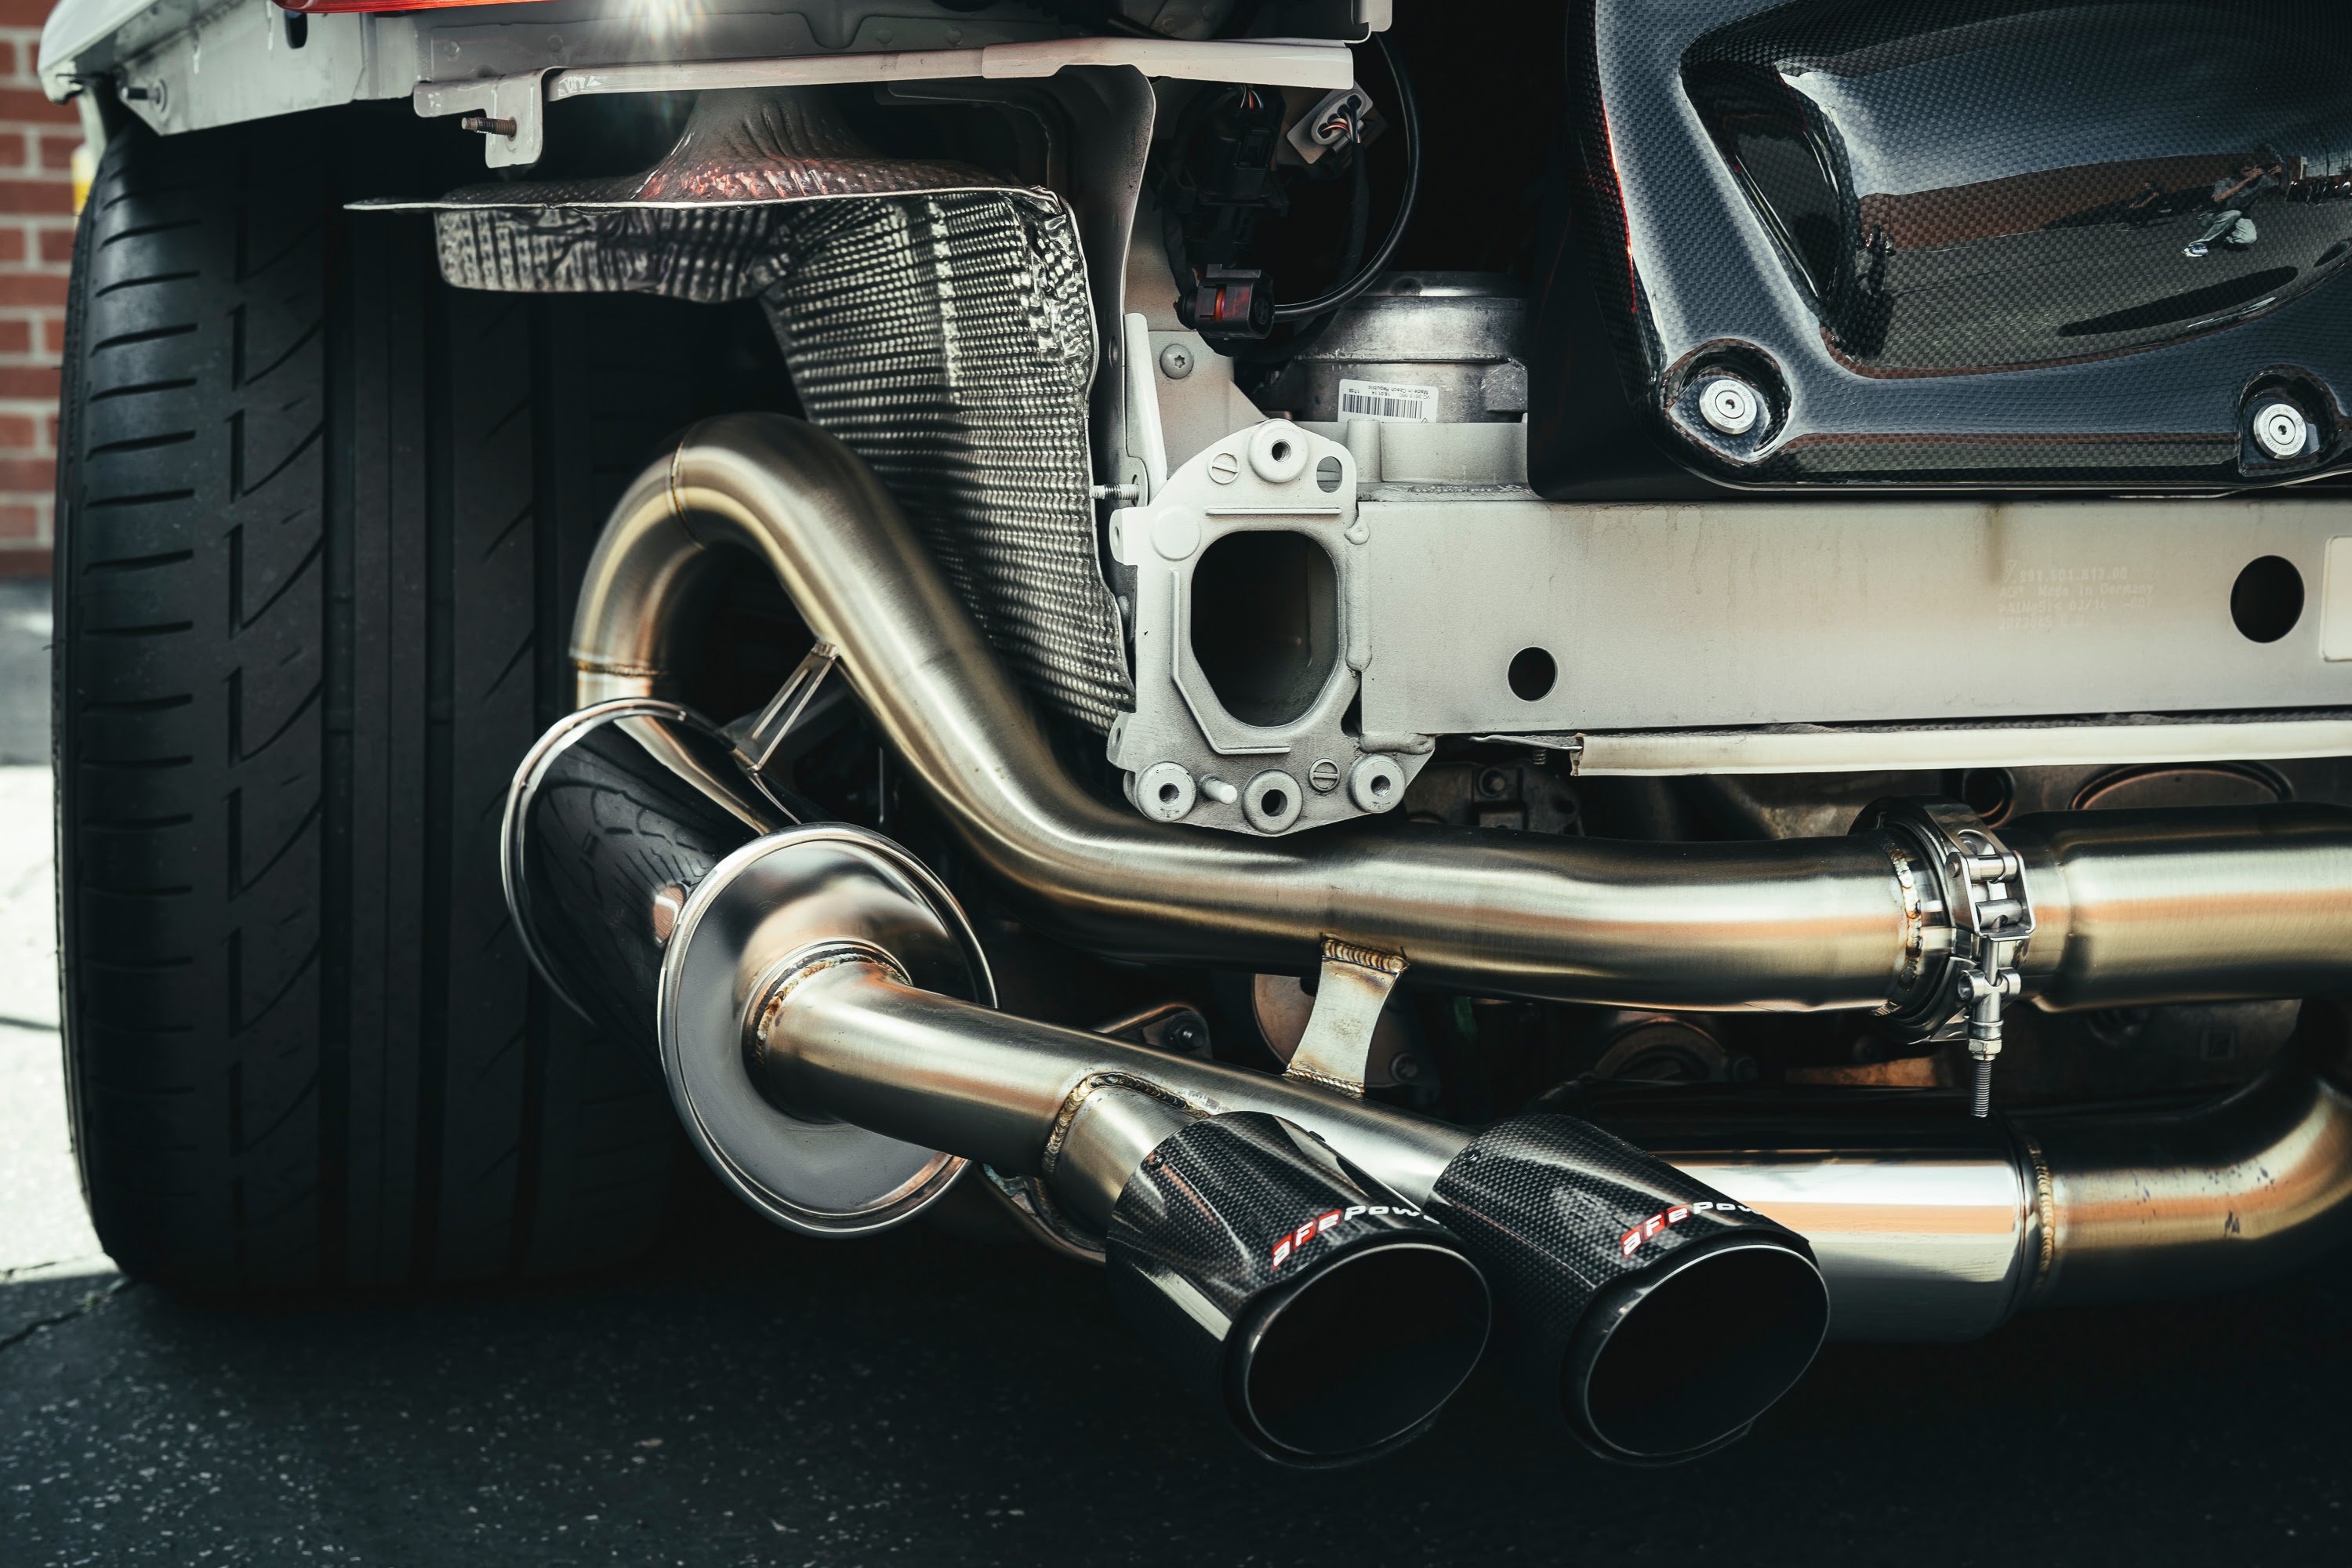 An AFE Power exhaust on a 991 Turbo.